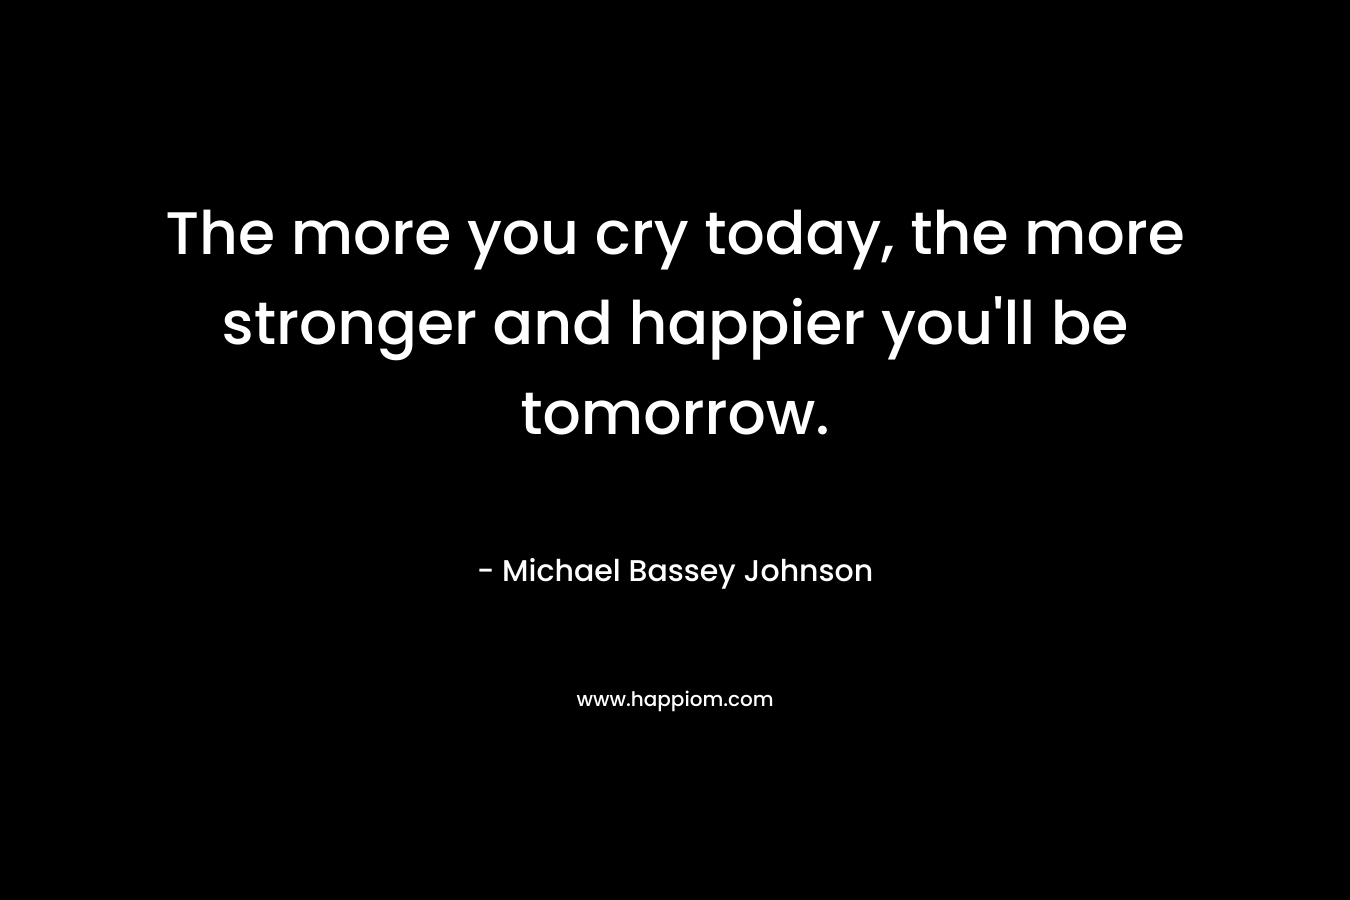 The more you cry today, the more stronger and happier you'll be tomorrow.